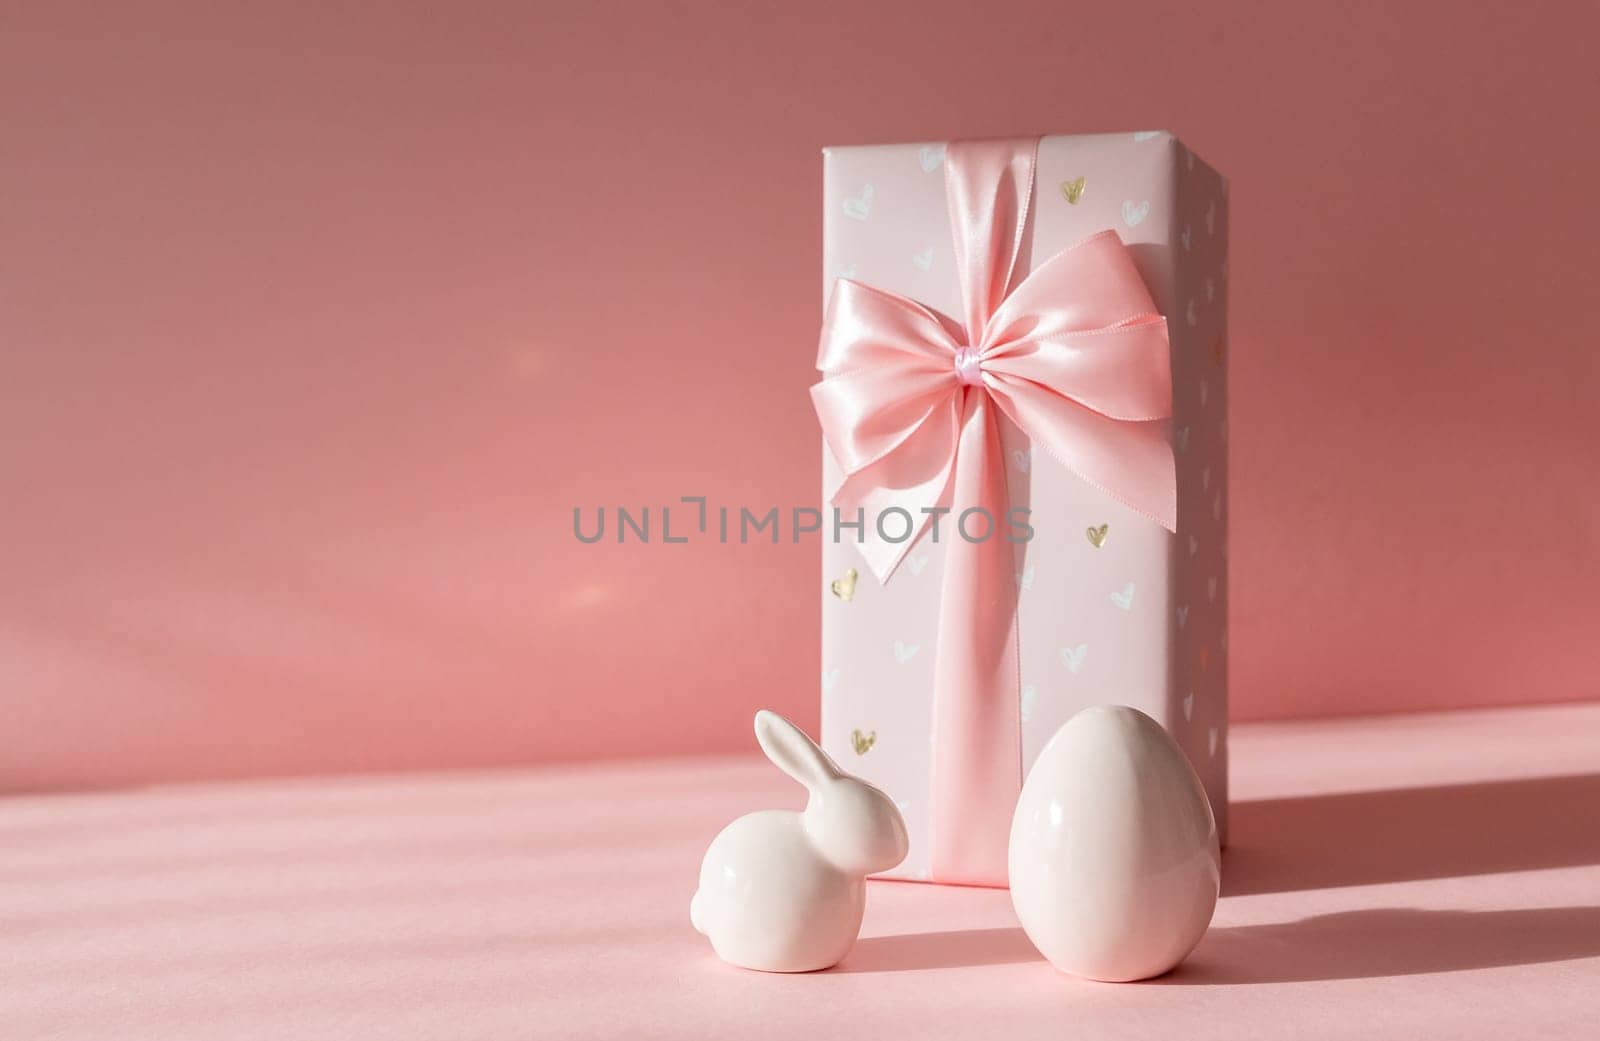 Porcelain figurines of Easter eggs and a big bunny gift box stand on the right on a pink background with shadows and copy space on the left, side view close-up.